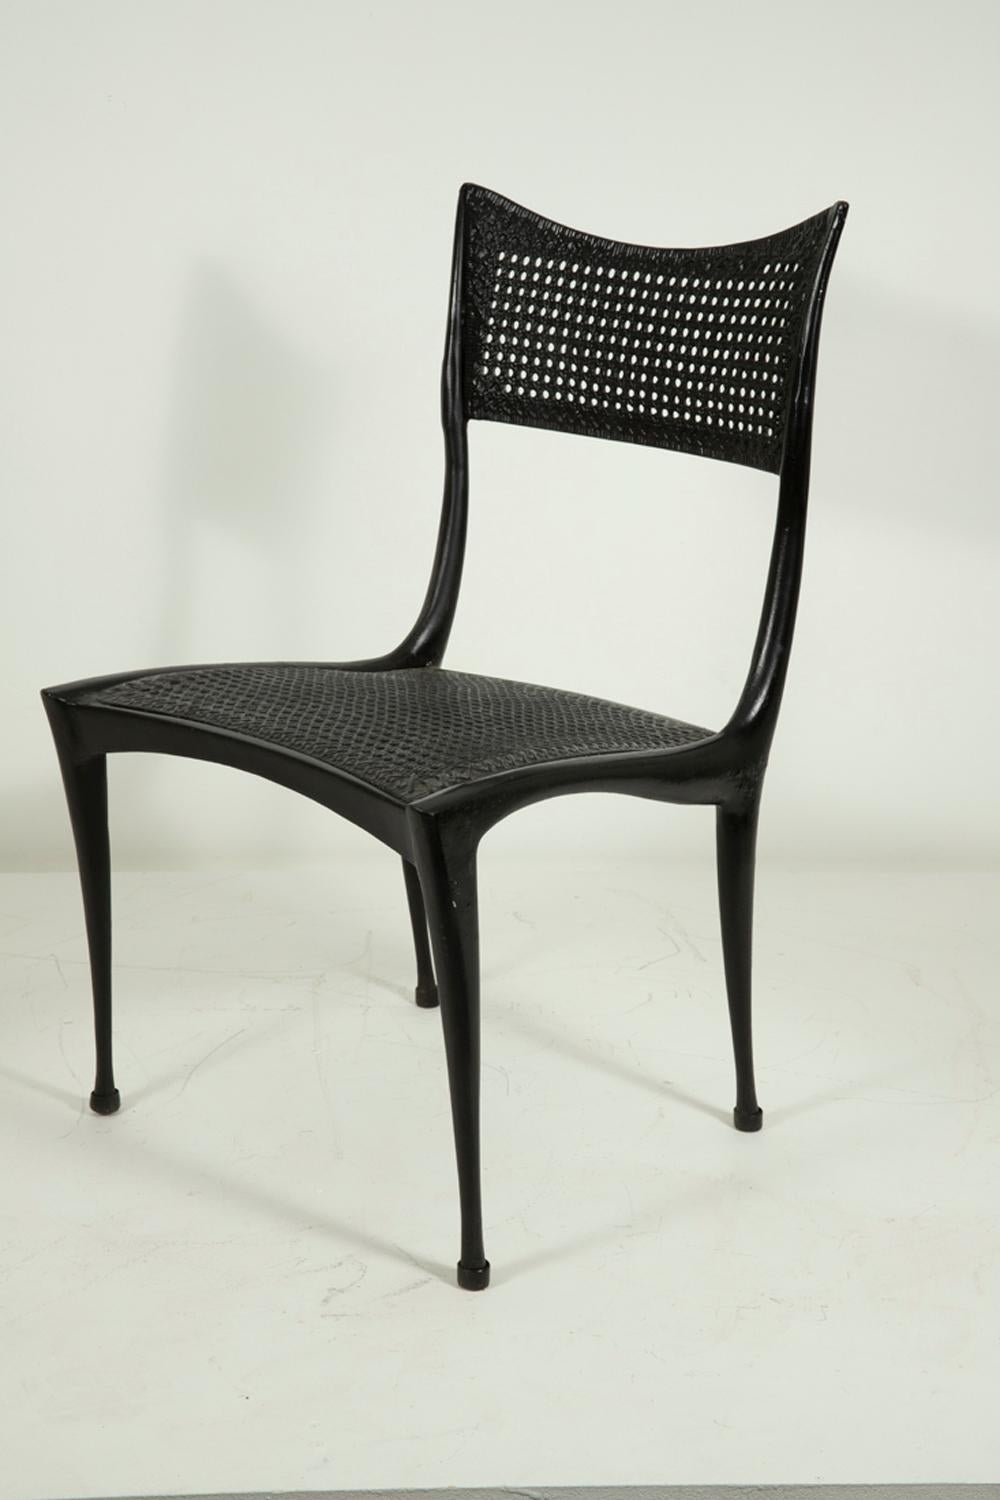 A rare single chair in executed in cast aluminum, with a black enamel finish.